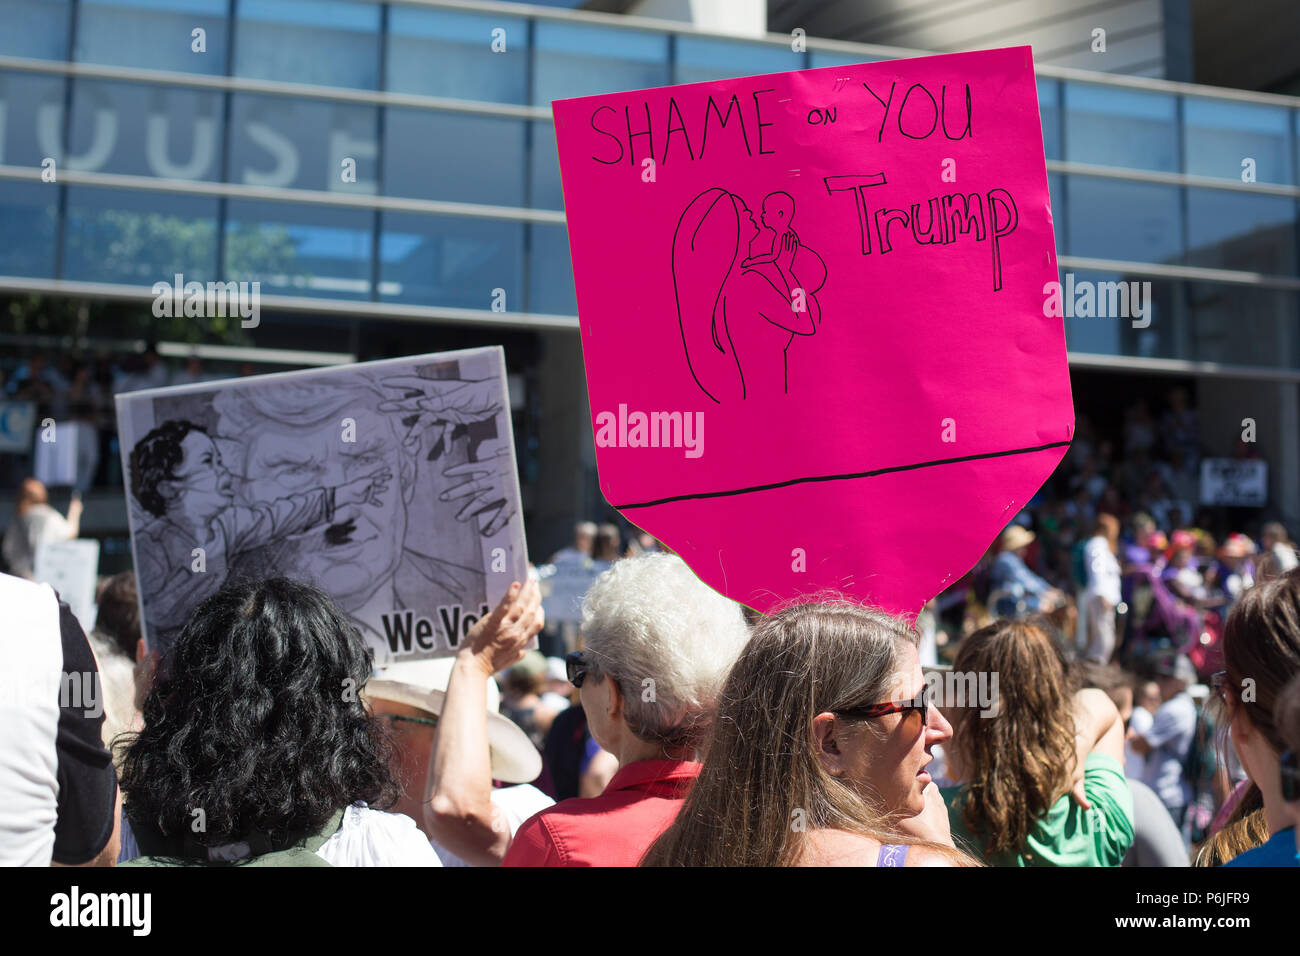 Eugene, Oregon, USA. 30th June, 2018. Citizens rally to protest the separation of immigrant children from their parents when crossing the border into the United States. Copyright: Gina Kelly/Alamy Live News Stock Photo